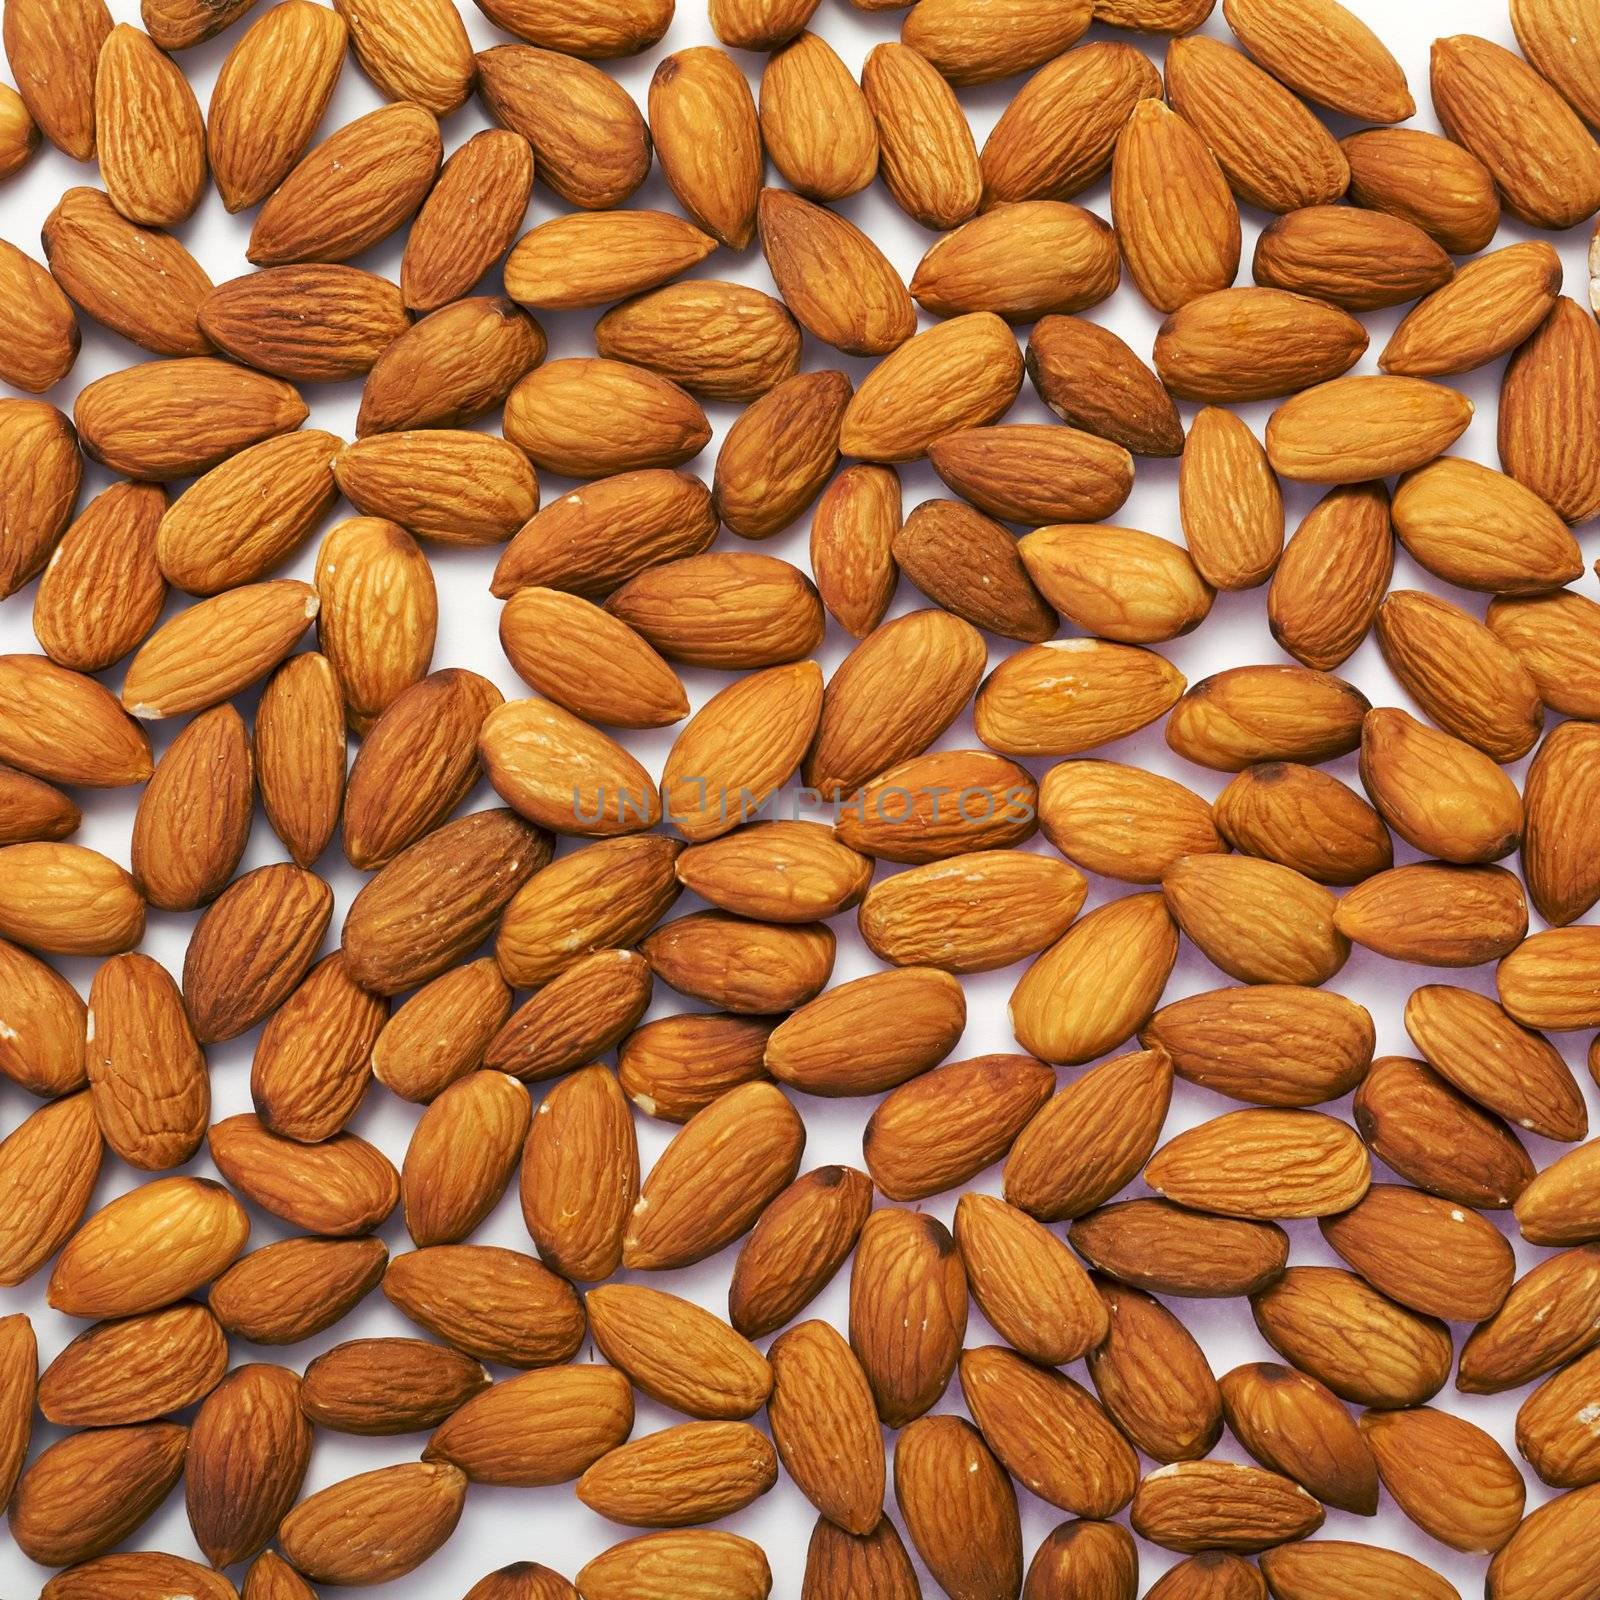 The cleared almond nut to scatter on a surface